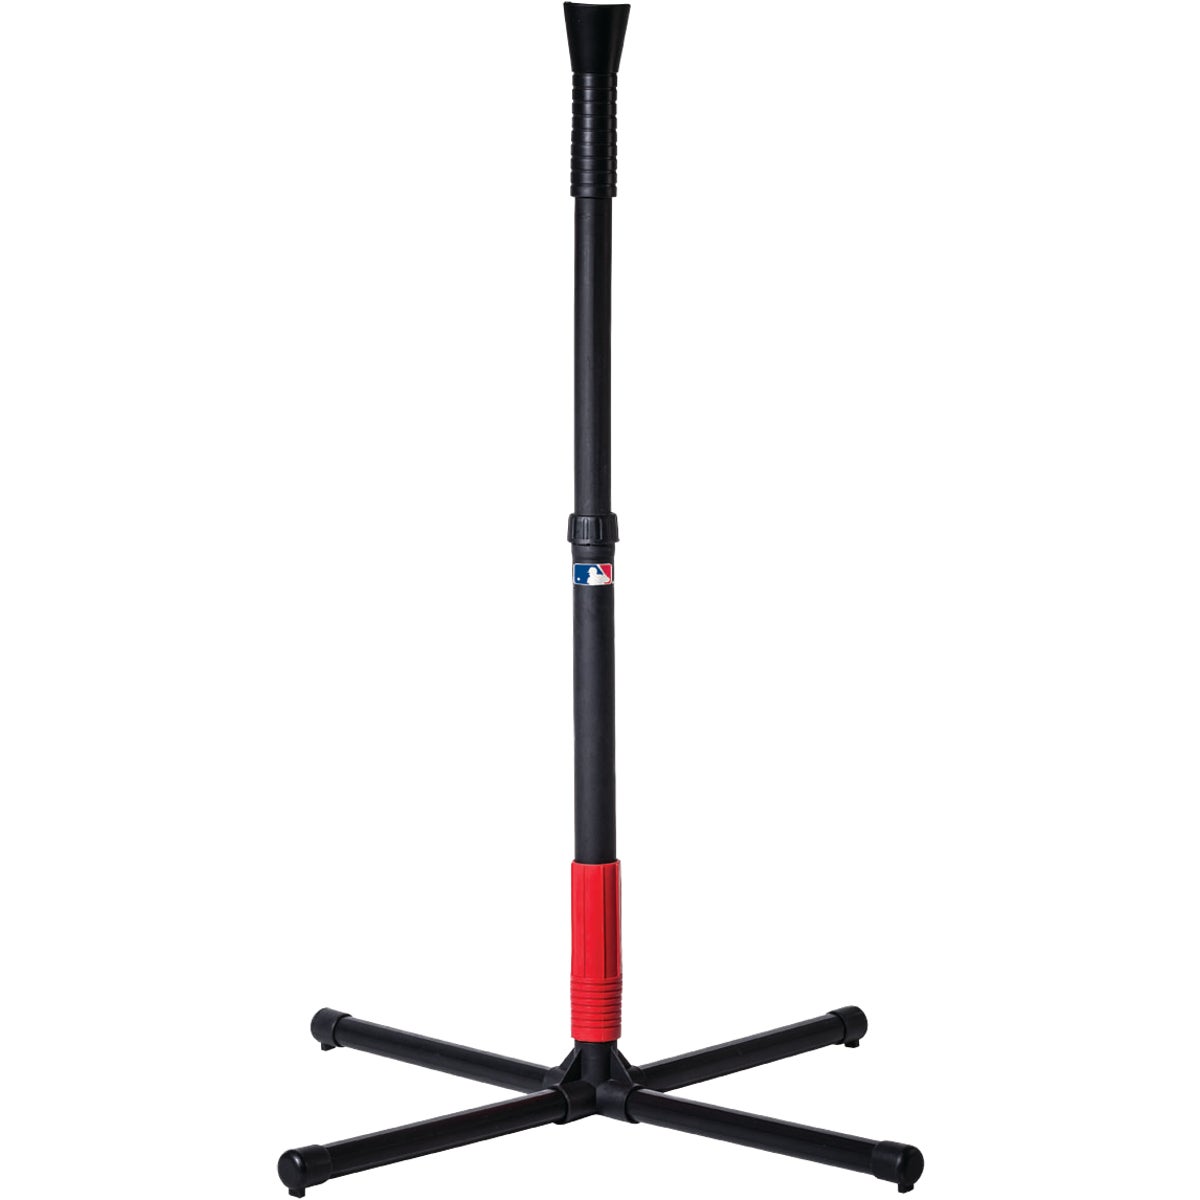 Item 816576, Heavy-duty, sturdy design, portable batting tee. Sets up in seconds.